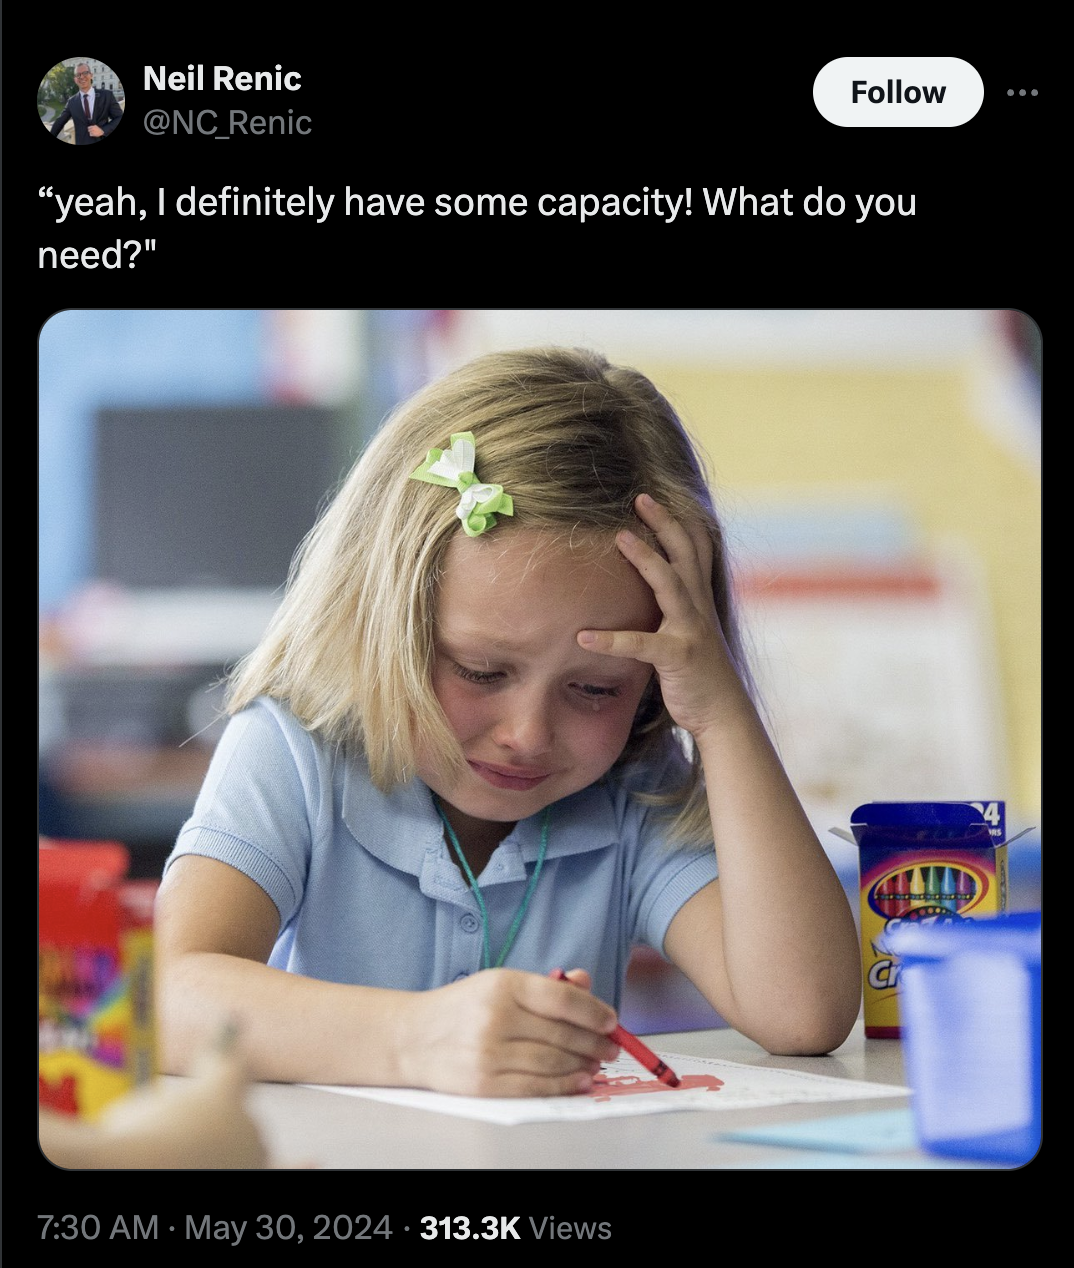 crying drawing kid meme - Neil Renic "yeah, I definitely have some capacity! What do you need?" Views